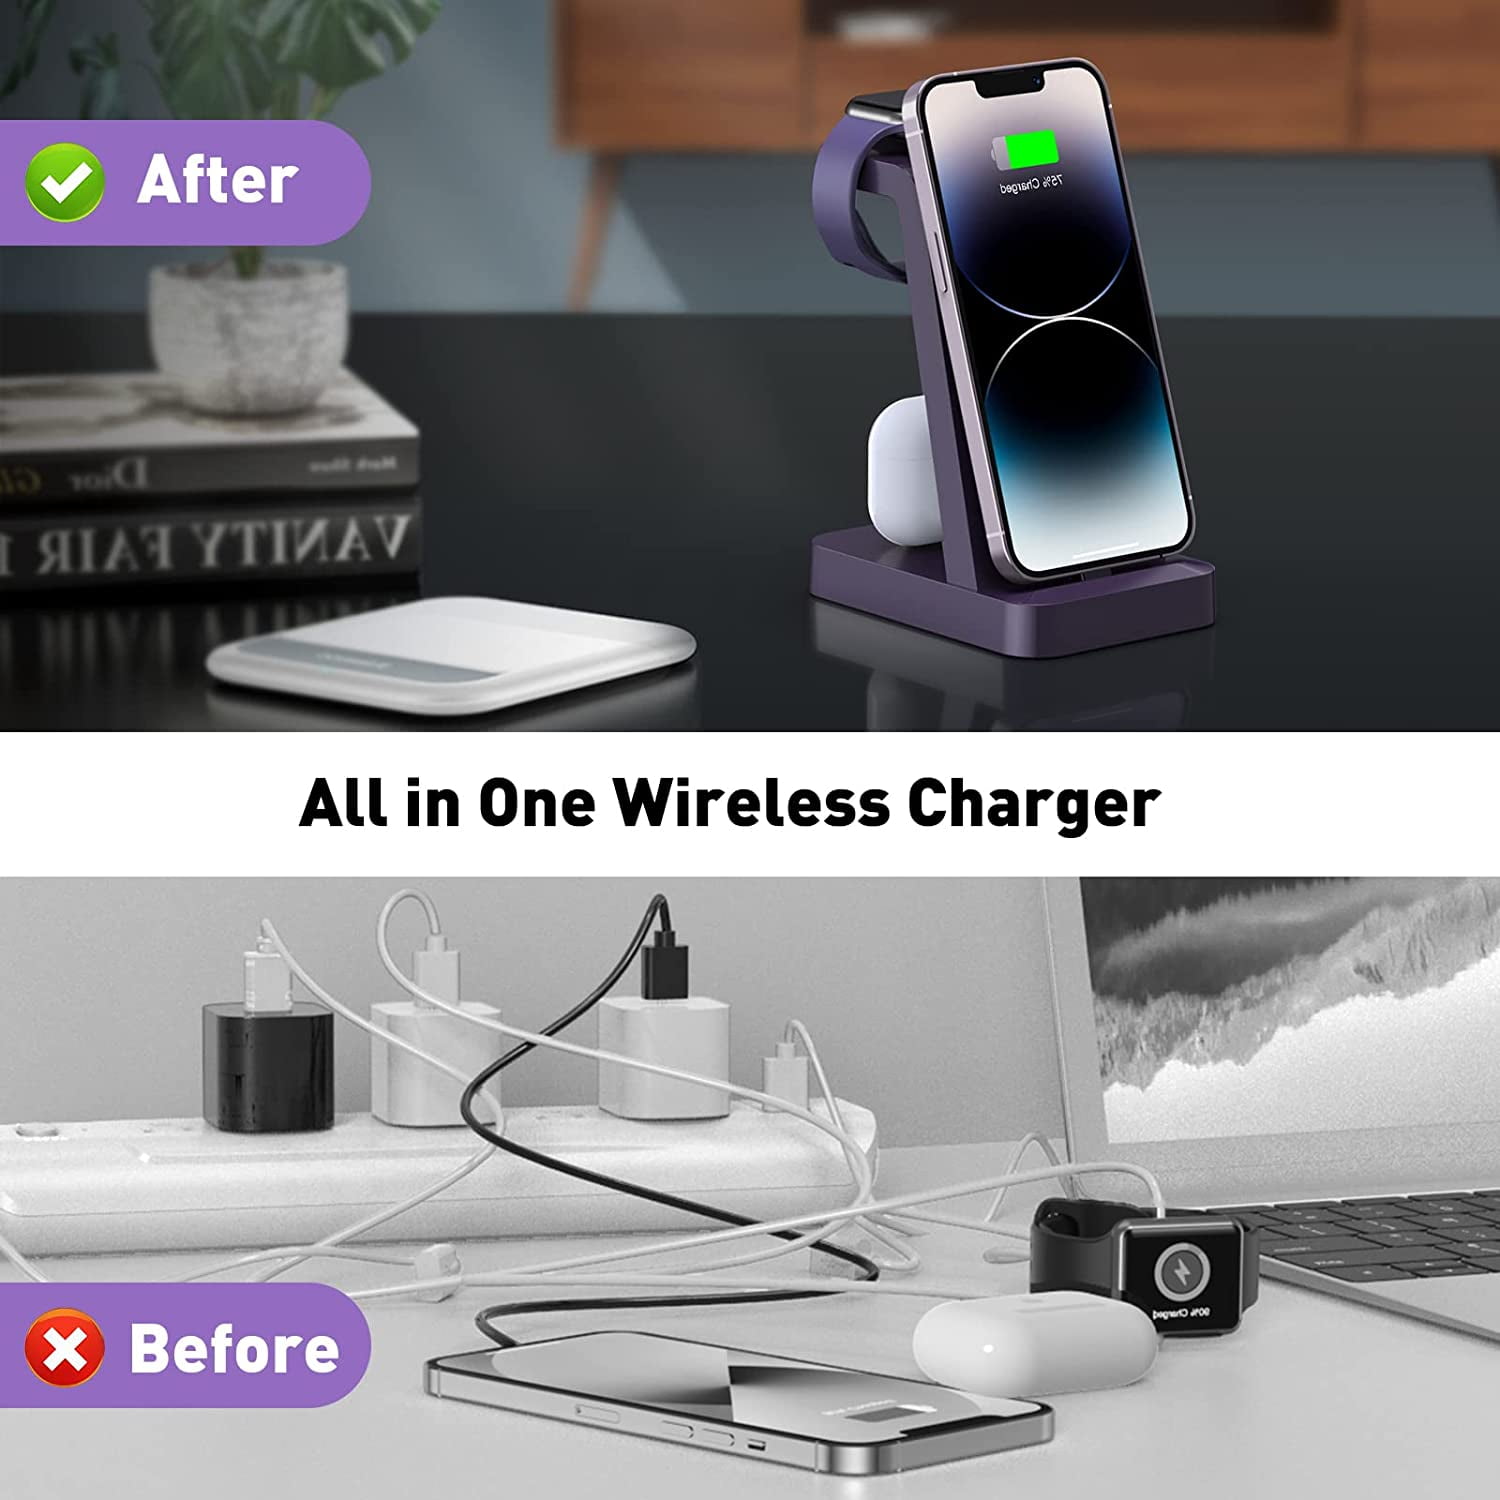 ETEPEHI 3 in 1 Charging Station for iPhone, Wireless Charger for